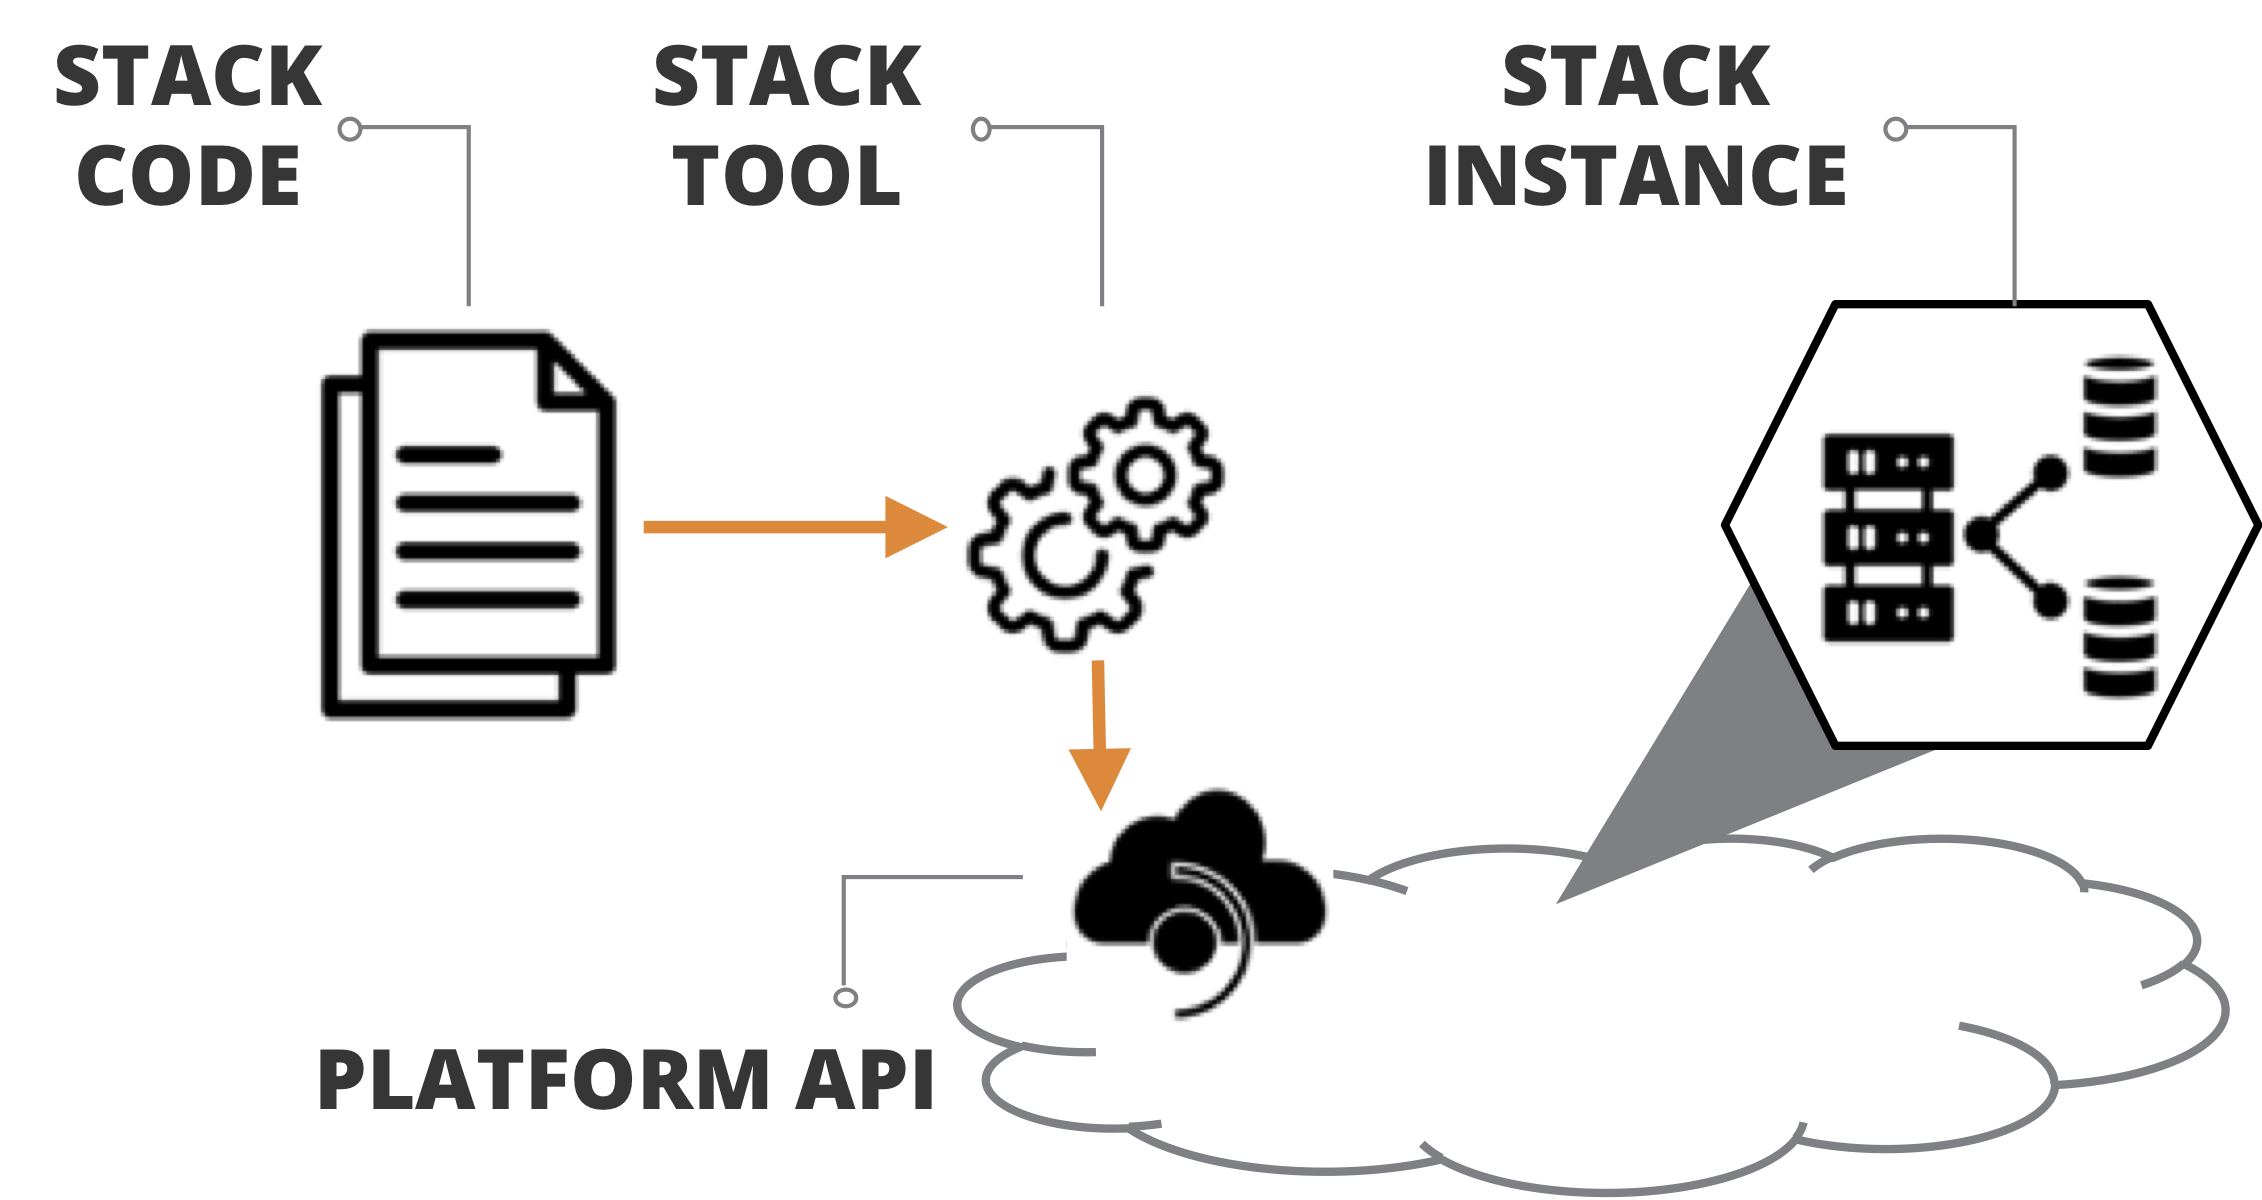 An infrastructure stack is a collection of infrastructure elements managed as a group.